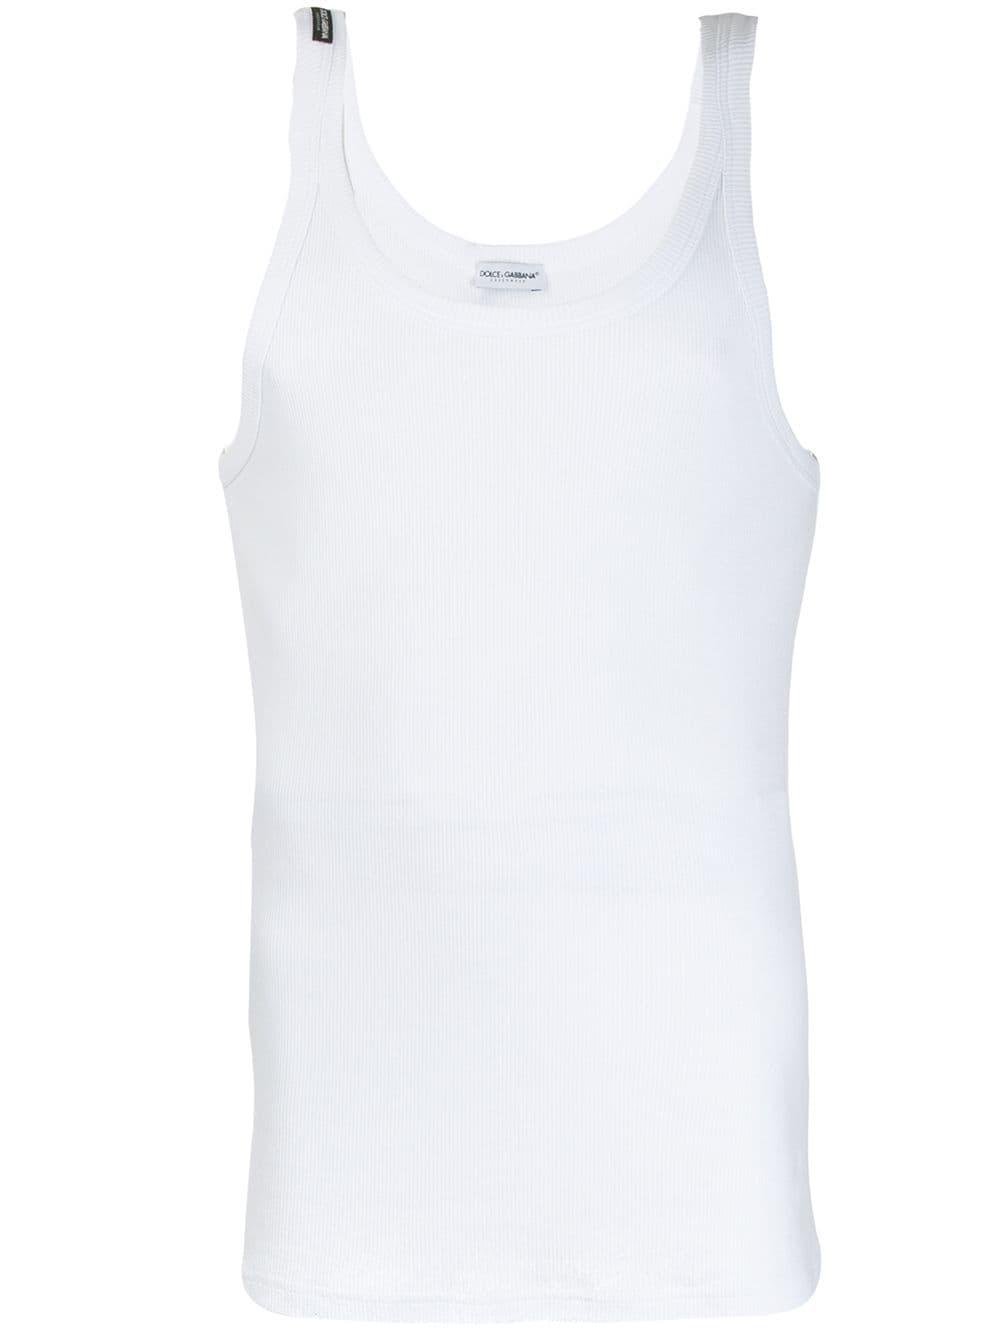 ribbed tank top by DOLCE&GABBANA